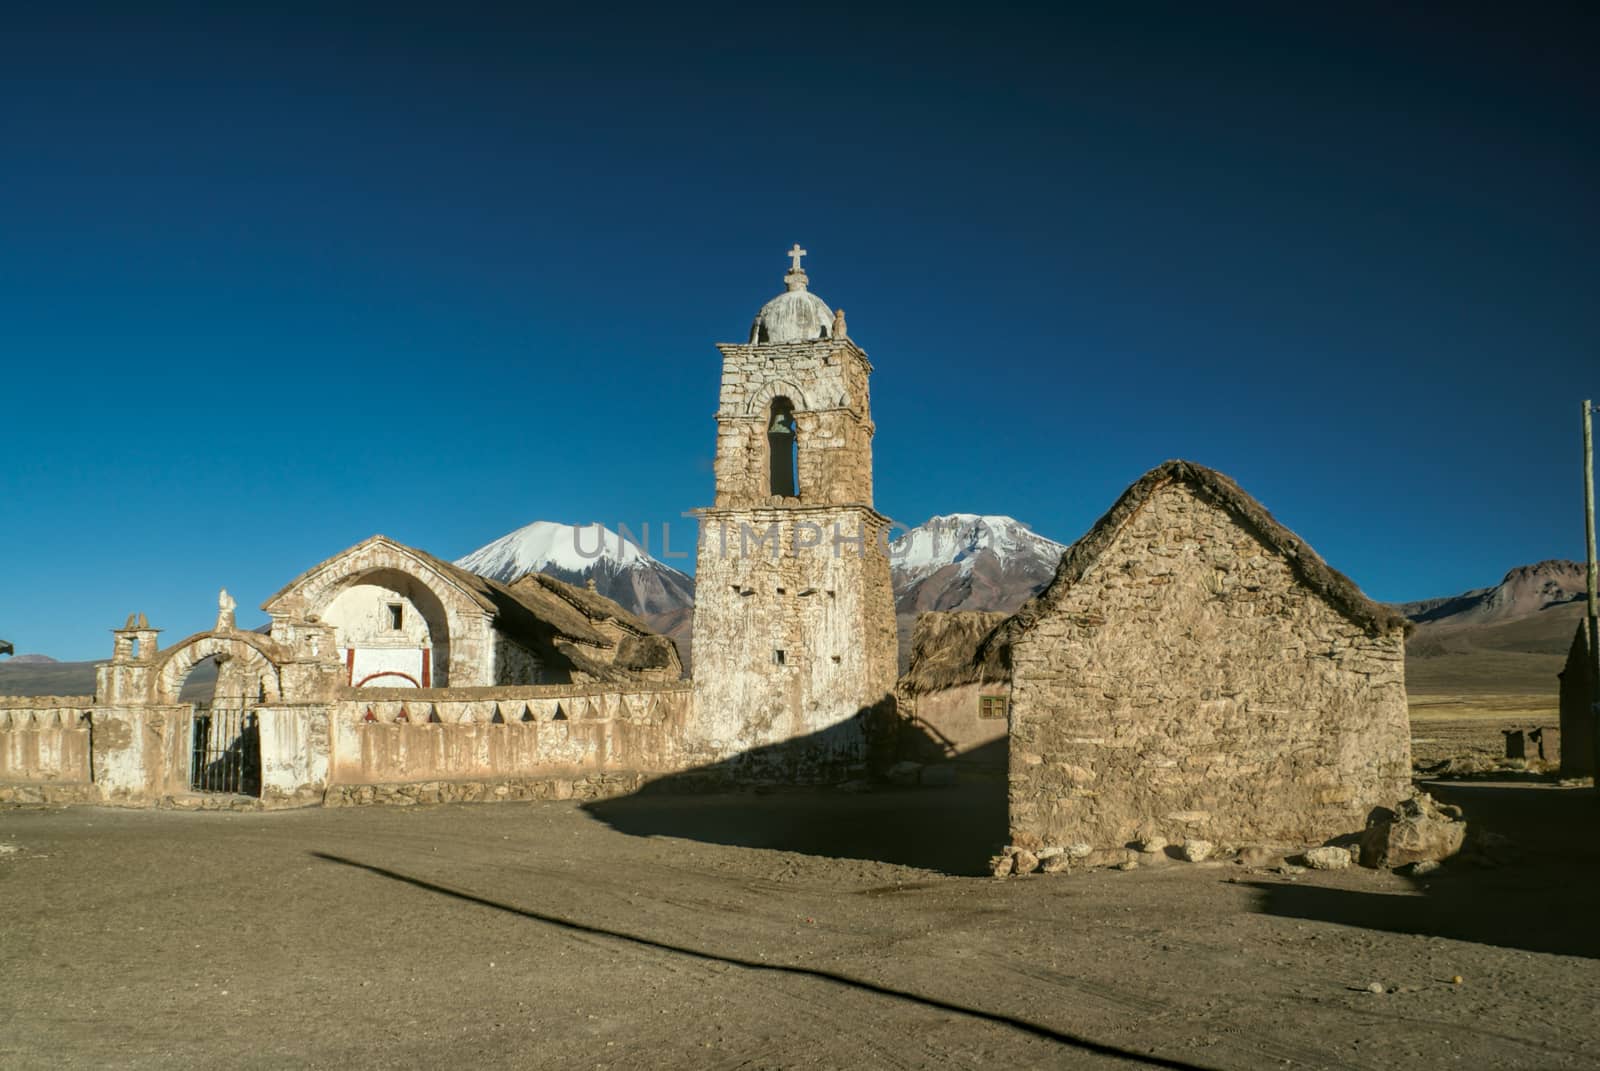 Picturesque old stone church in Sajama national park in Bolivia